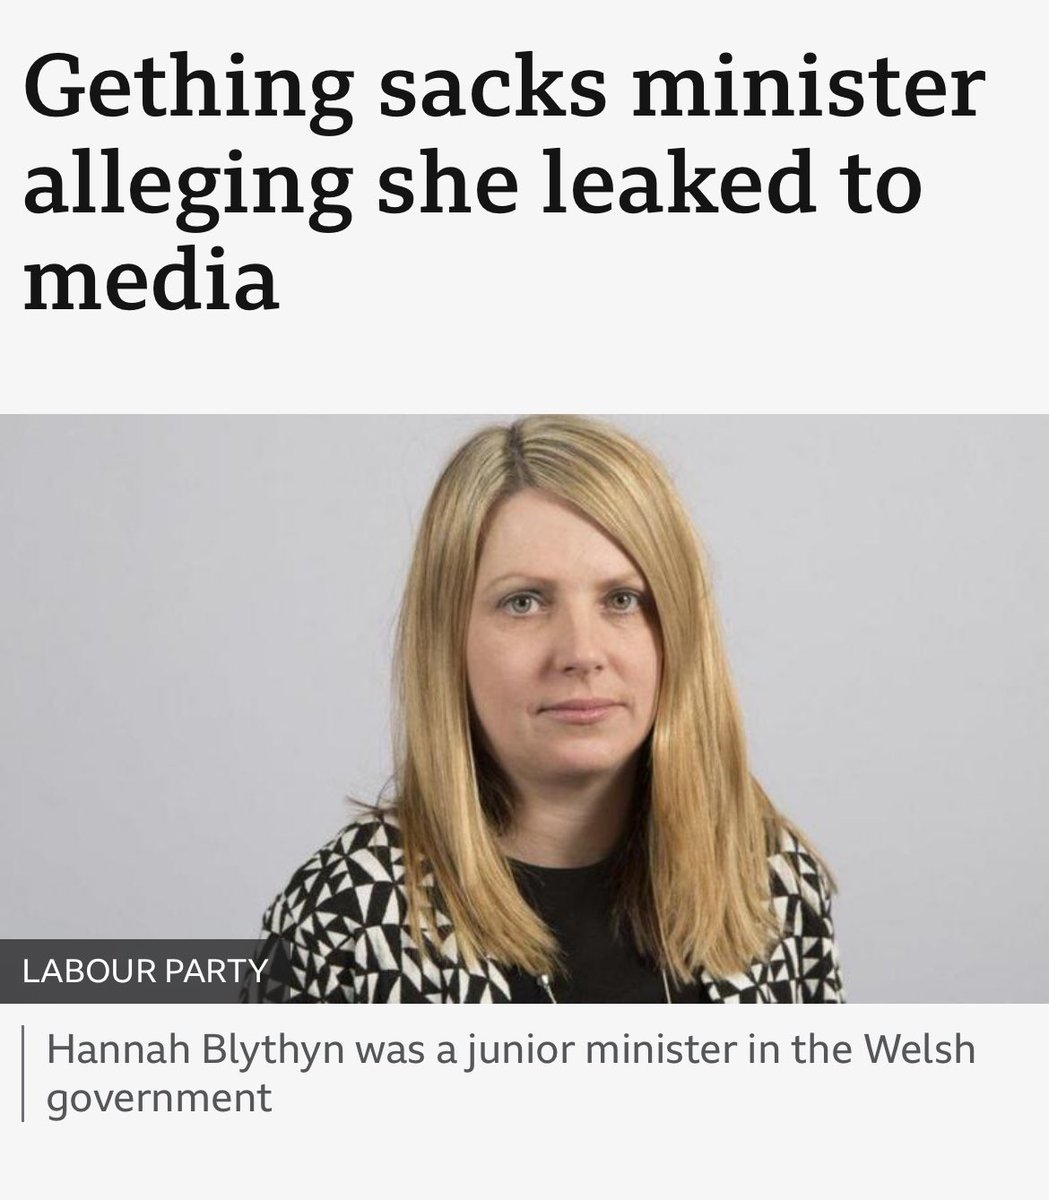 Vaughan Gething’s decisions in the Labour leadership contest are coming back to bite him. He’s sacked Hannah Blythyn for leaking messages. Yet she’s strenuously denied it. Only one of them can be right.